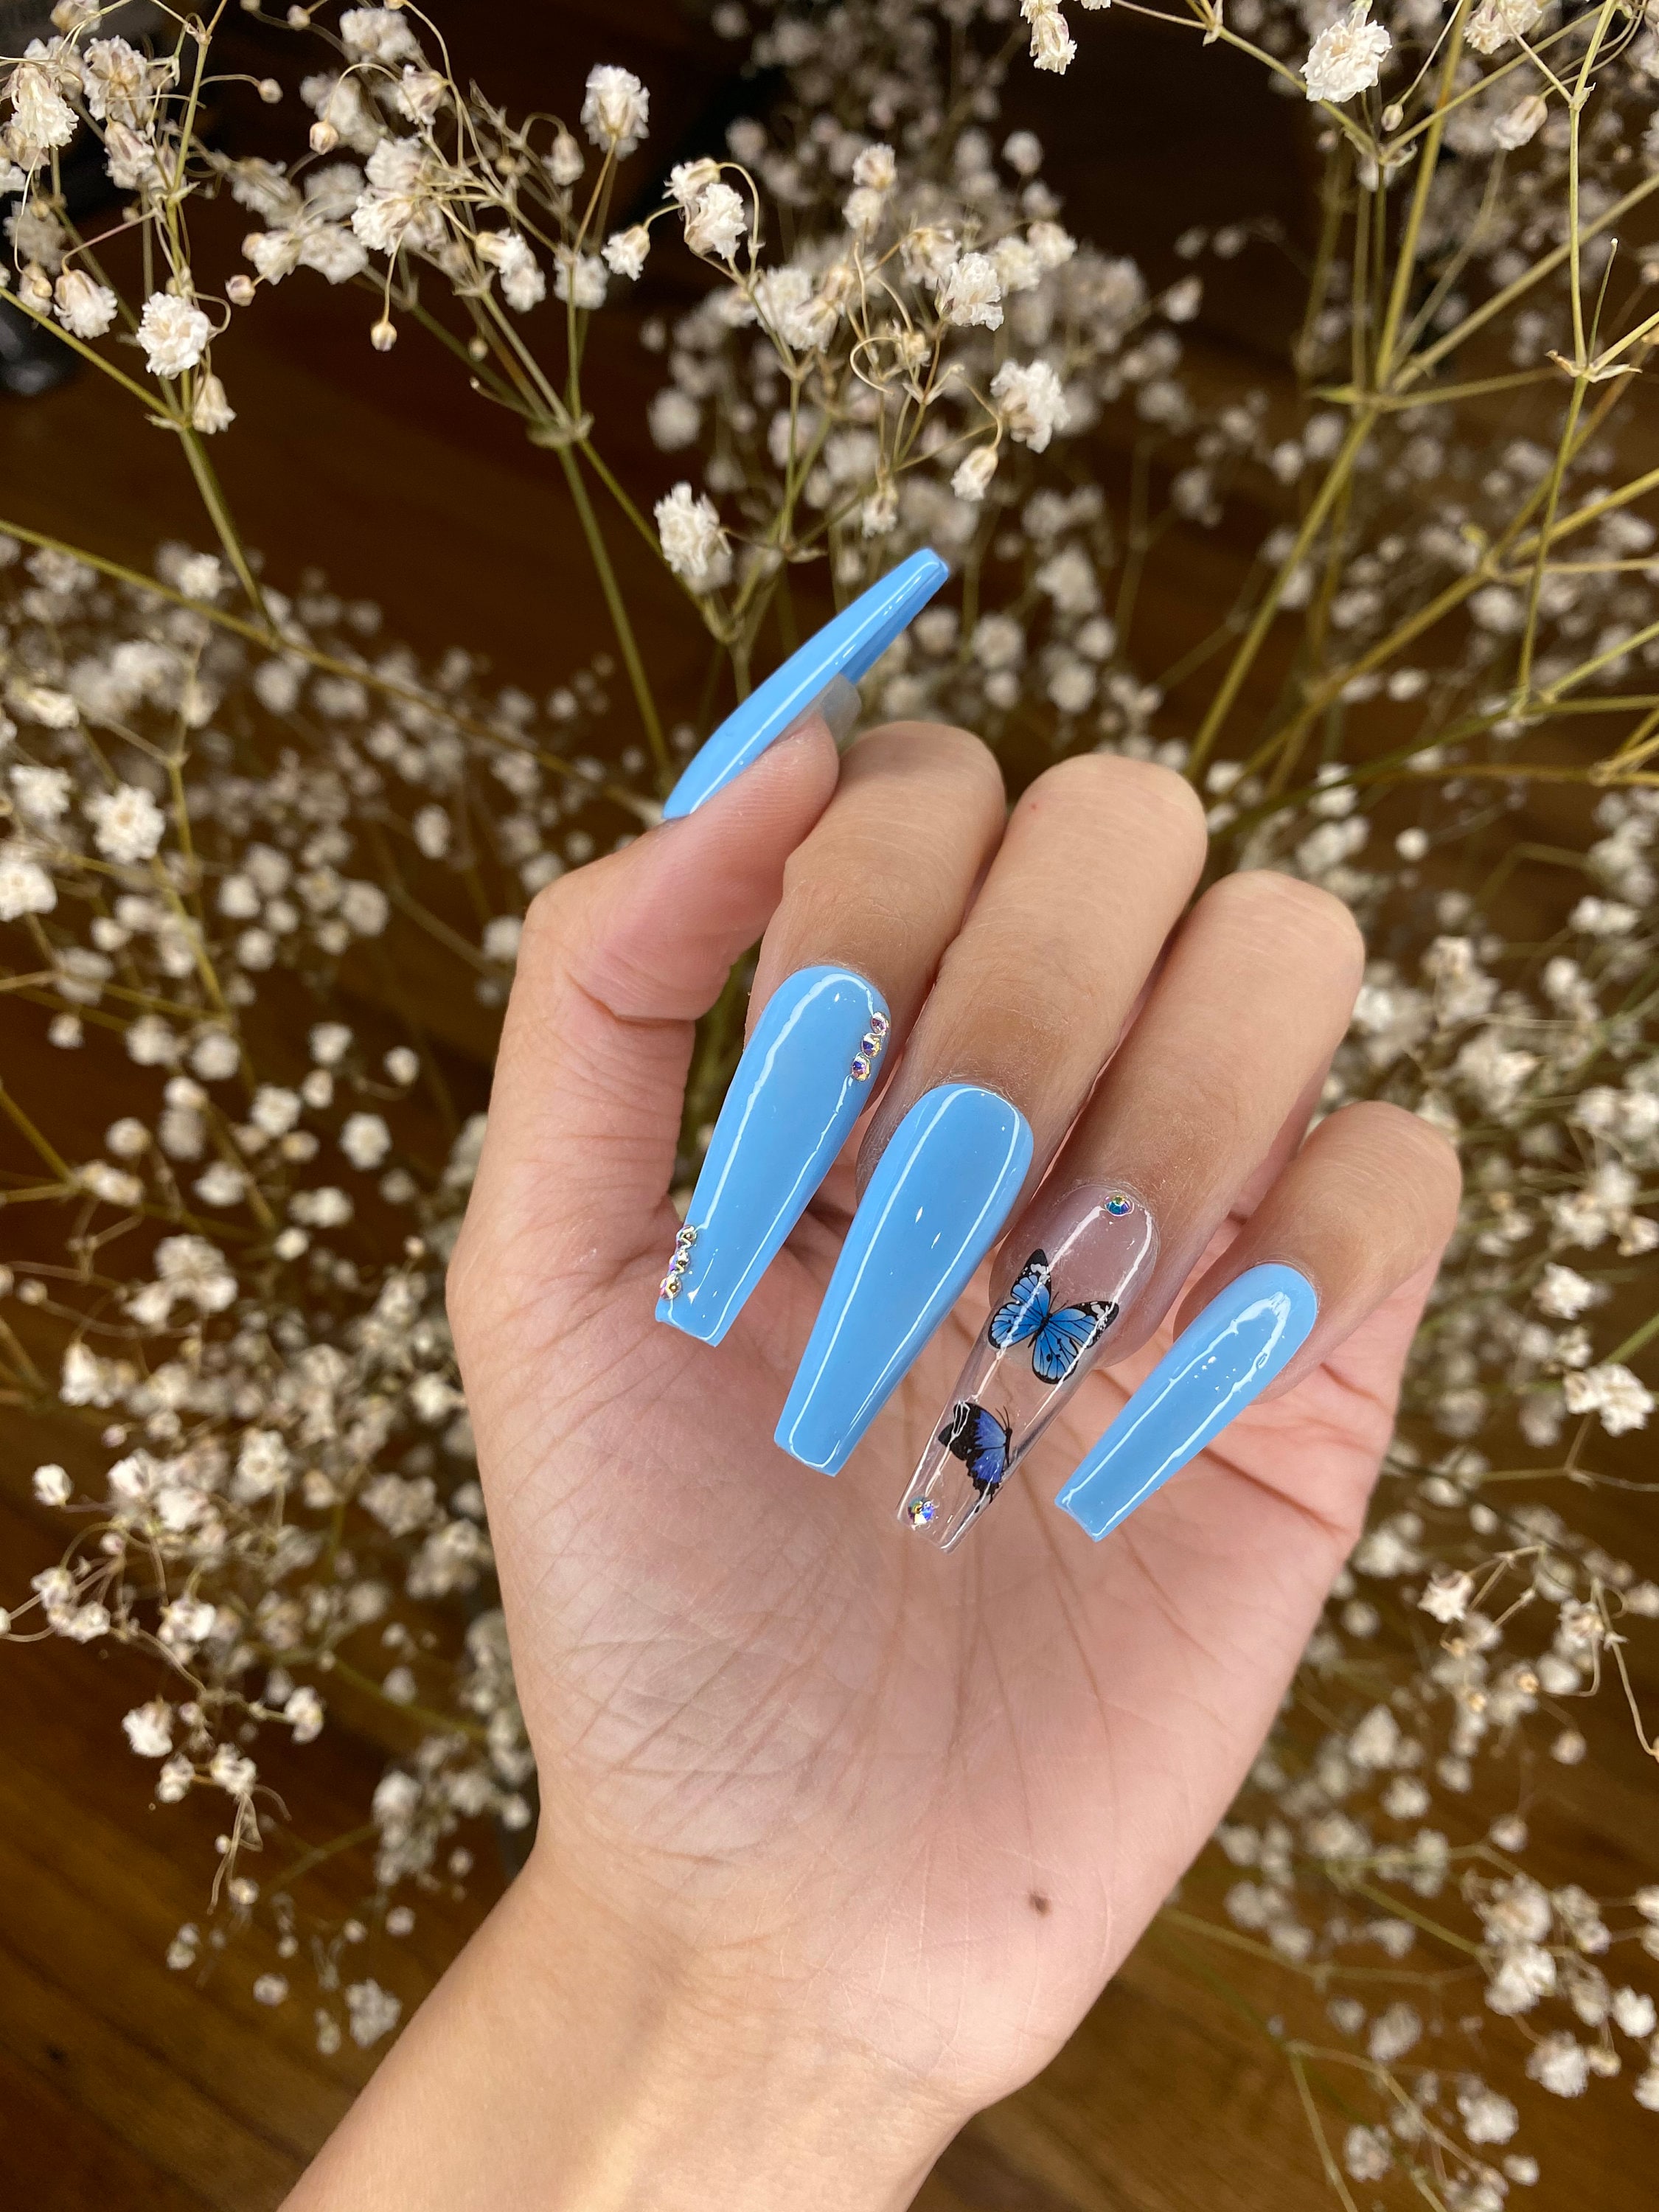 Butterfly Glitter Nails Press On Nails Blue Butterfly Fake Nails Glue On Nails Coffin or Ballerina Nails Black Butterfly Press On Nails